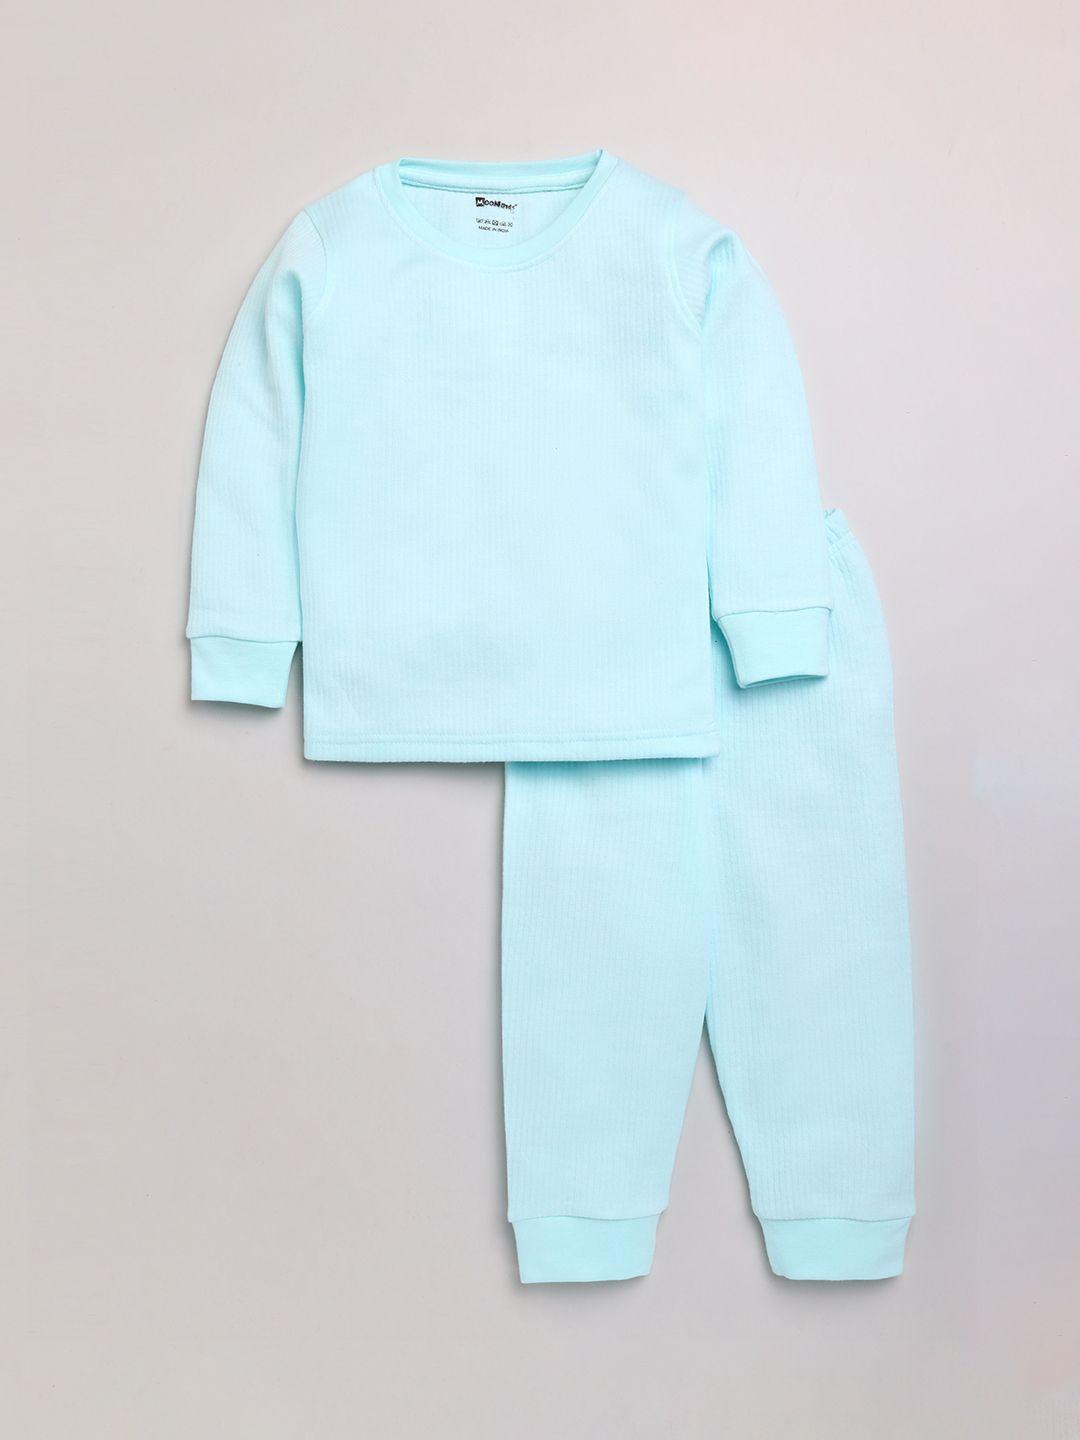 moonkids-boys-blue-solid-thermal-set